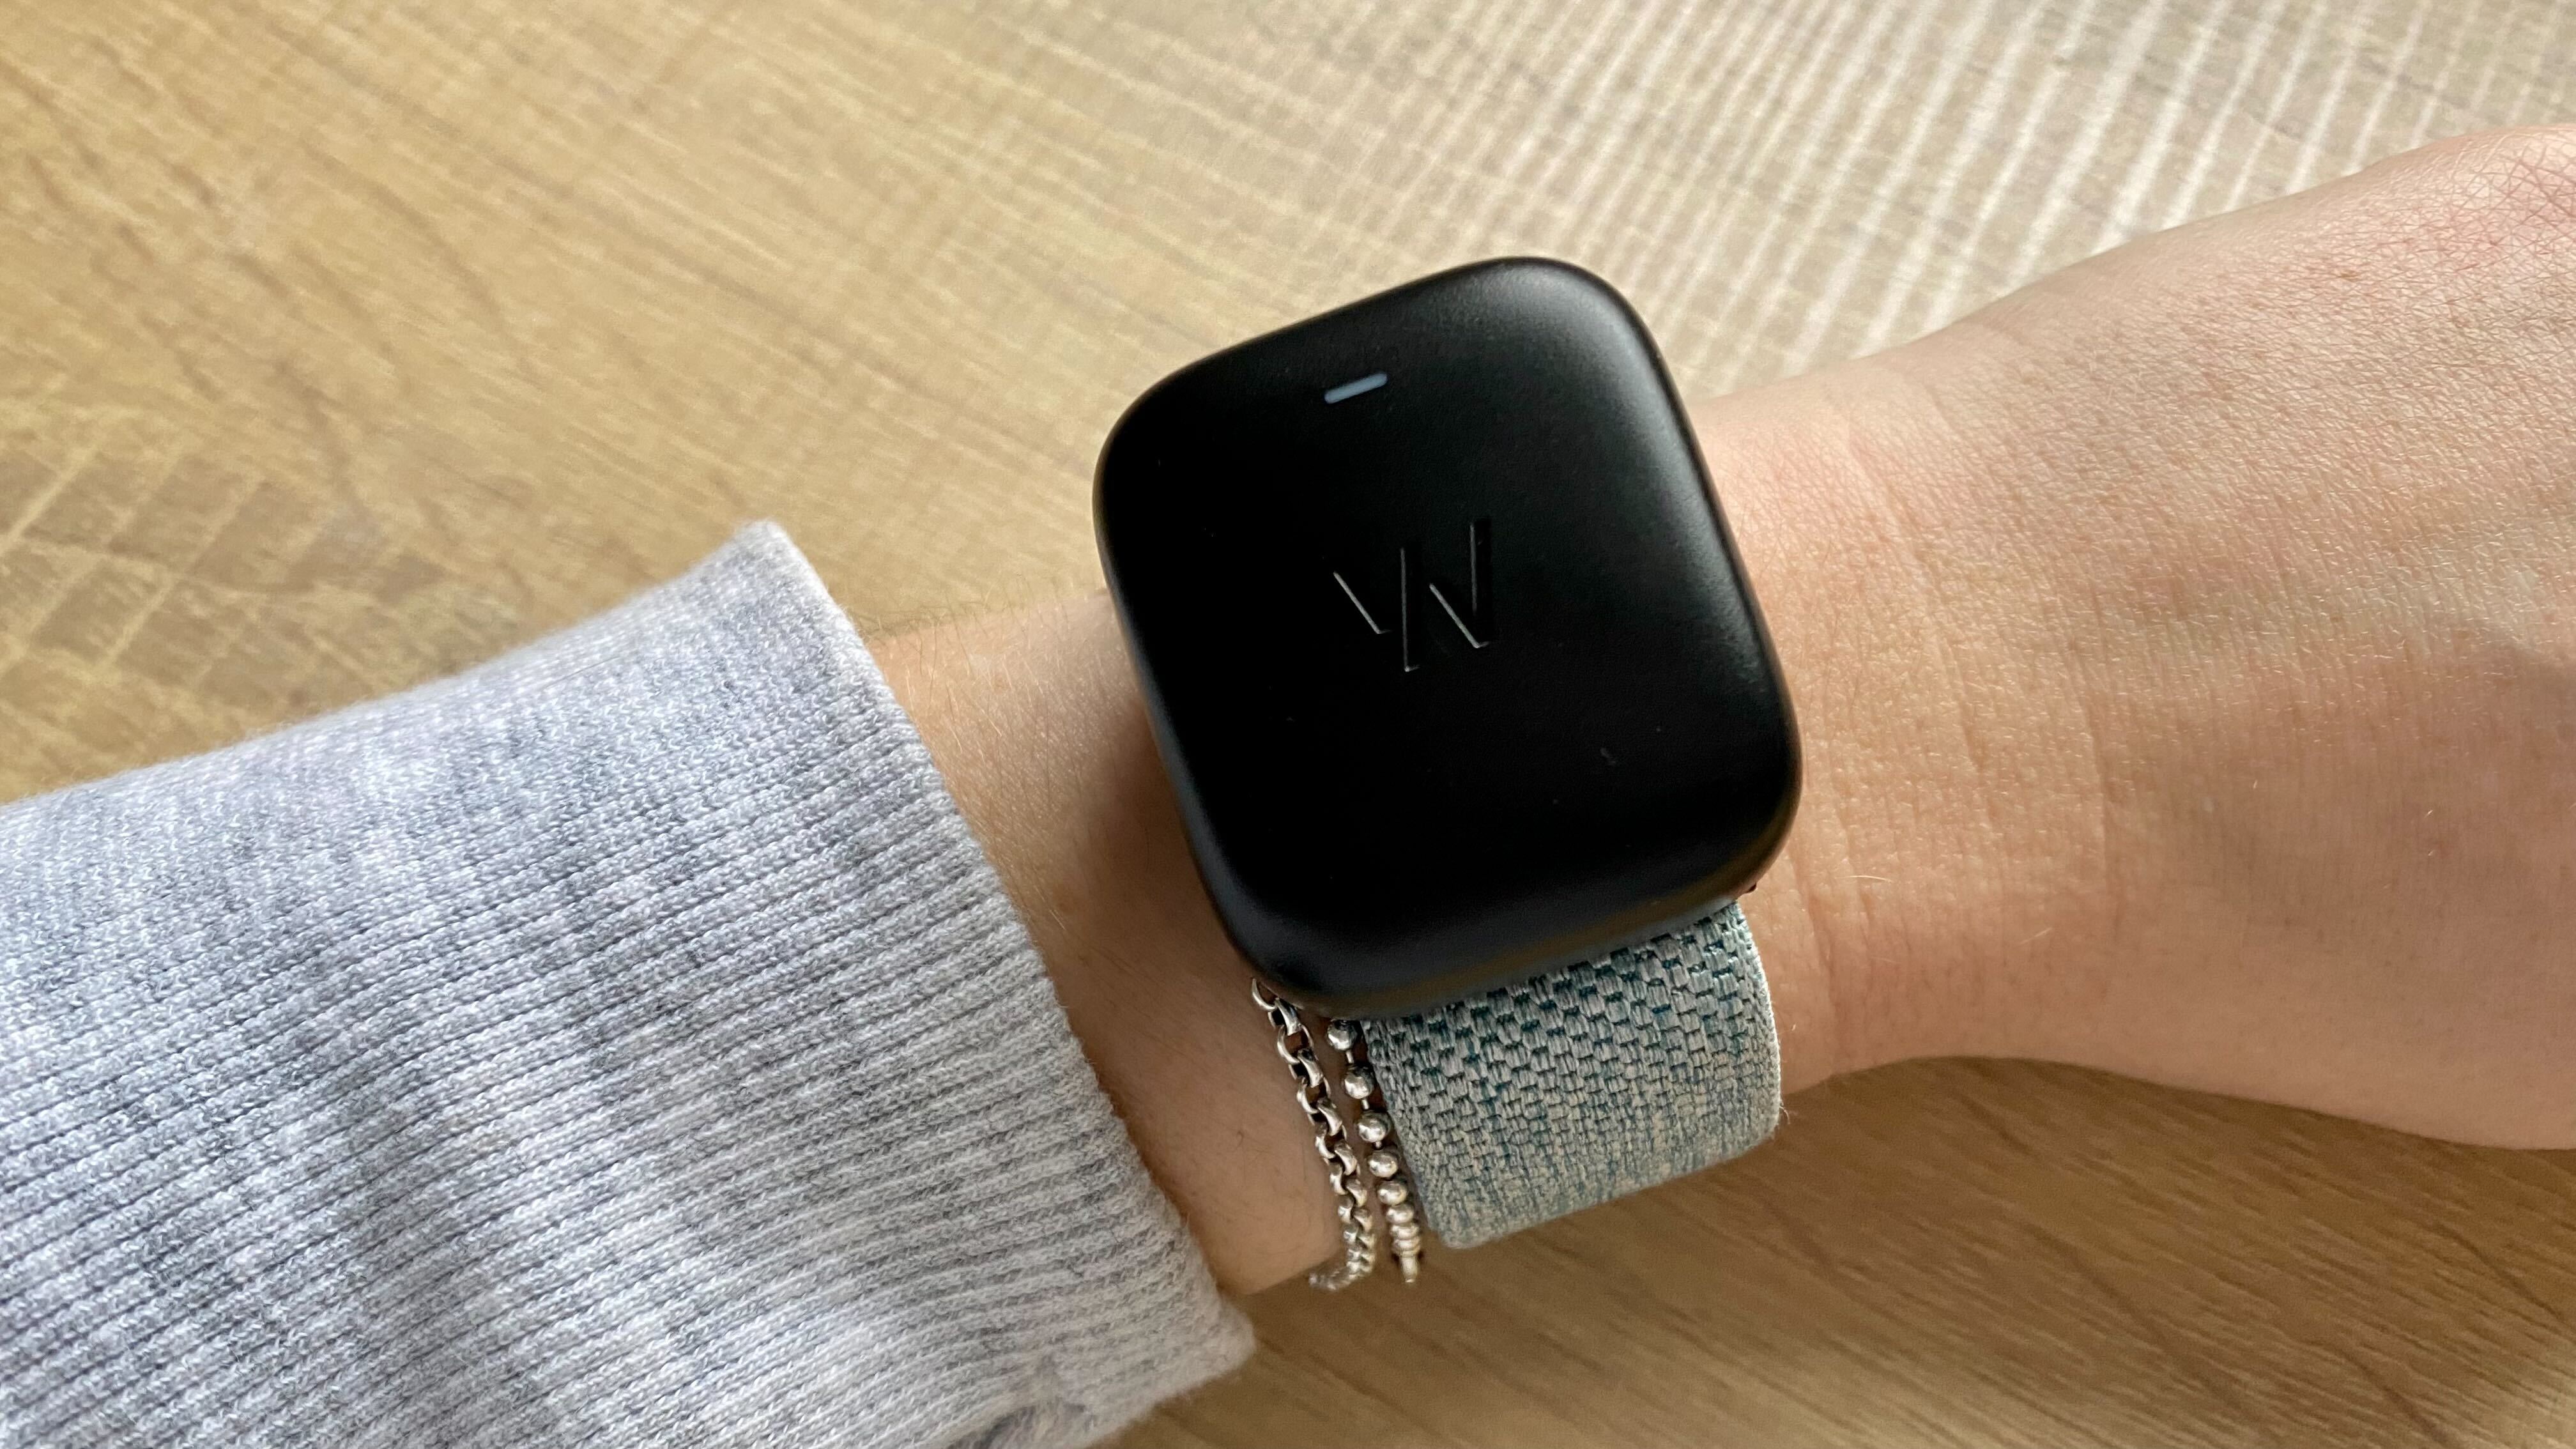 A photo of the Whoop wristband with charger